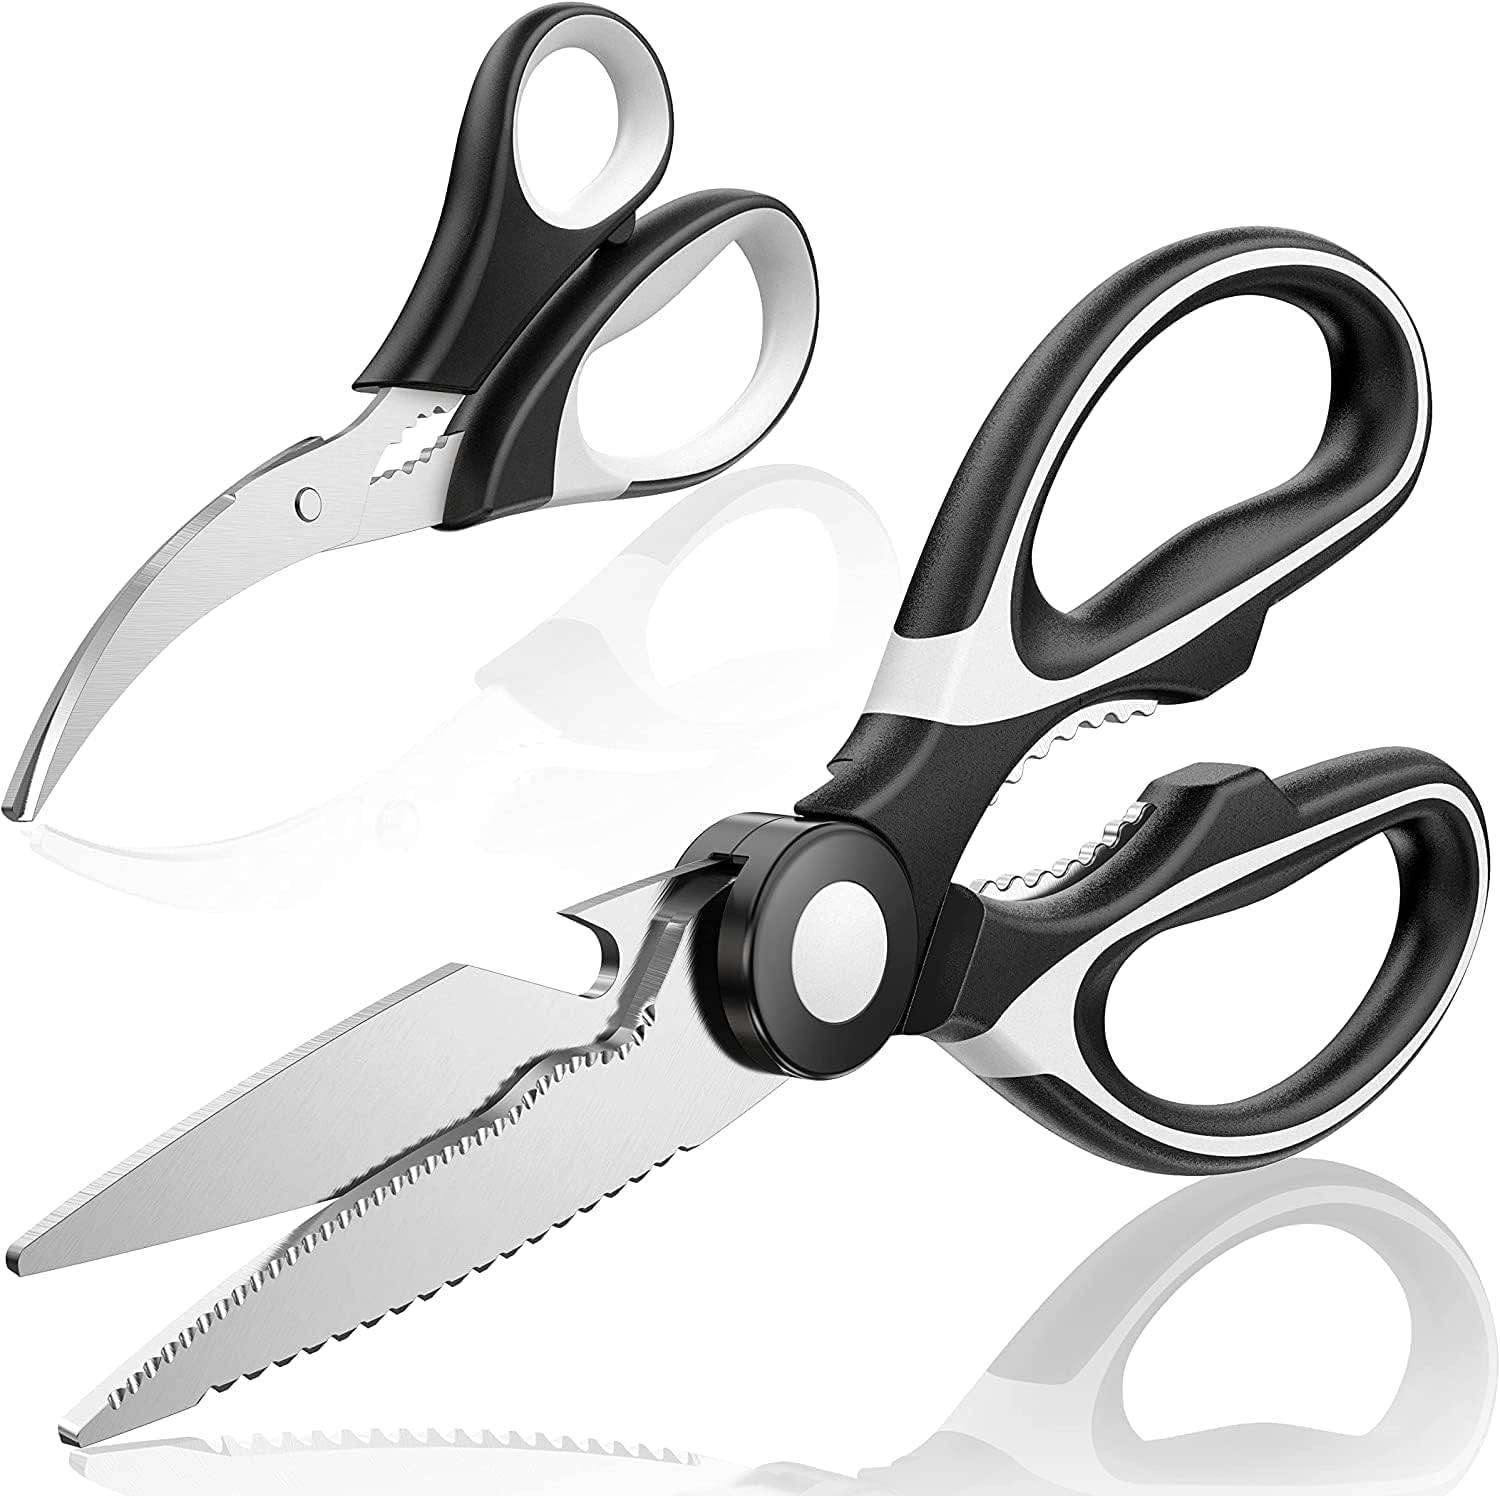 The sharpest black kitchen scissors: These kitchen scissors are made of heavy-duty stainless steel and will be the most durable tool in your kitchen! You can use them to cut anything you want, including chicken, poultry, fish, cooked and raw meat, vegetables, fruits, herbs, and anything else you need for your meal. QSCQ multifunctional scissors will never disappoint you. So you can basically use them to cut anything you want,Stainless Steel Scissors, not just food! This is the best gift for parents or partners, and also the best helper in their kitchen..